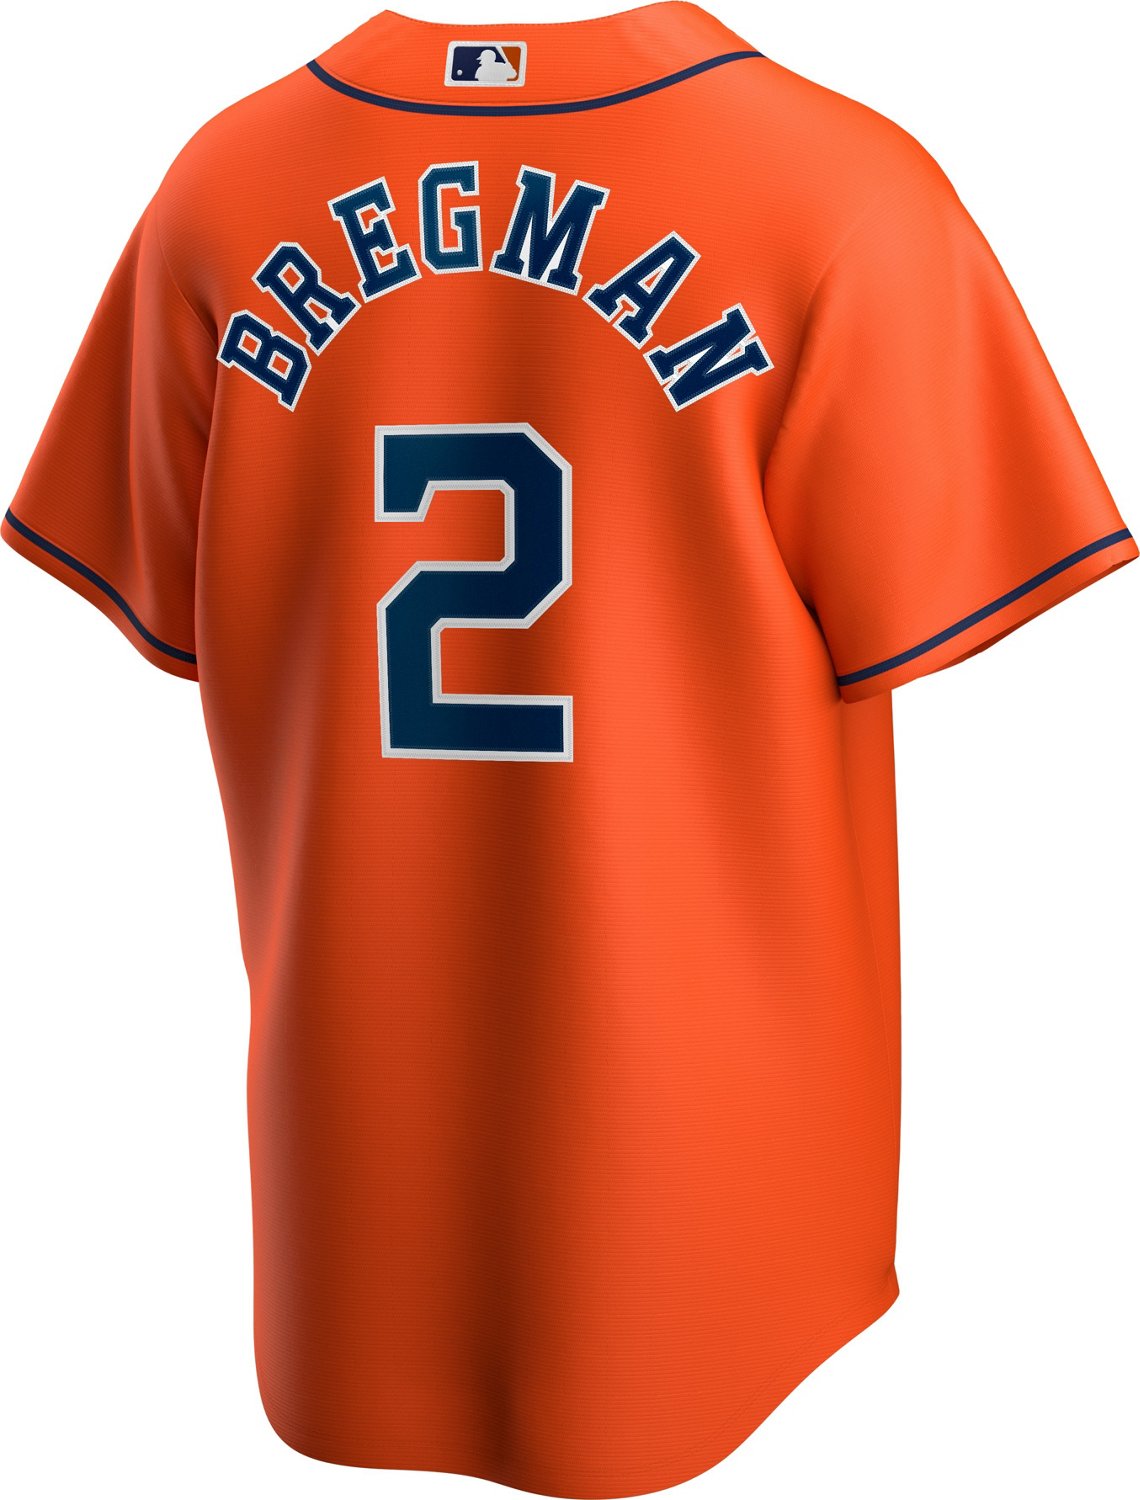 Nike MLB, Shirts, Astros Jersey Nikealex Bregman Black And Gold Must Have  Size Large Fits Big